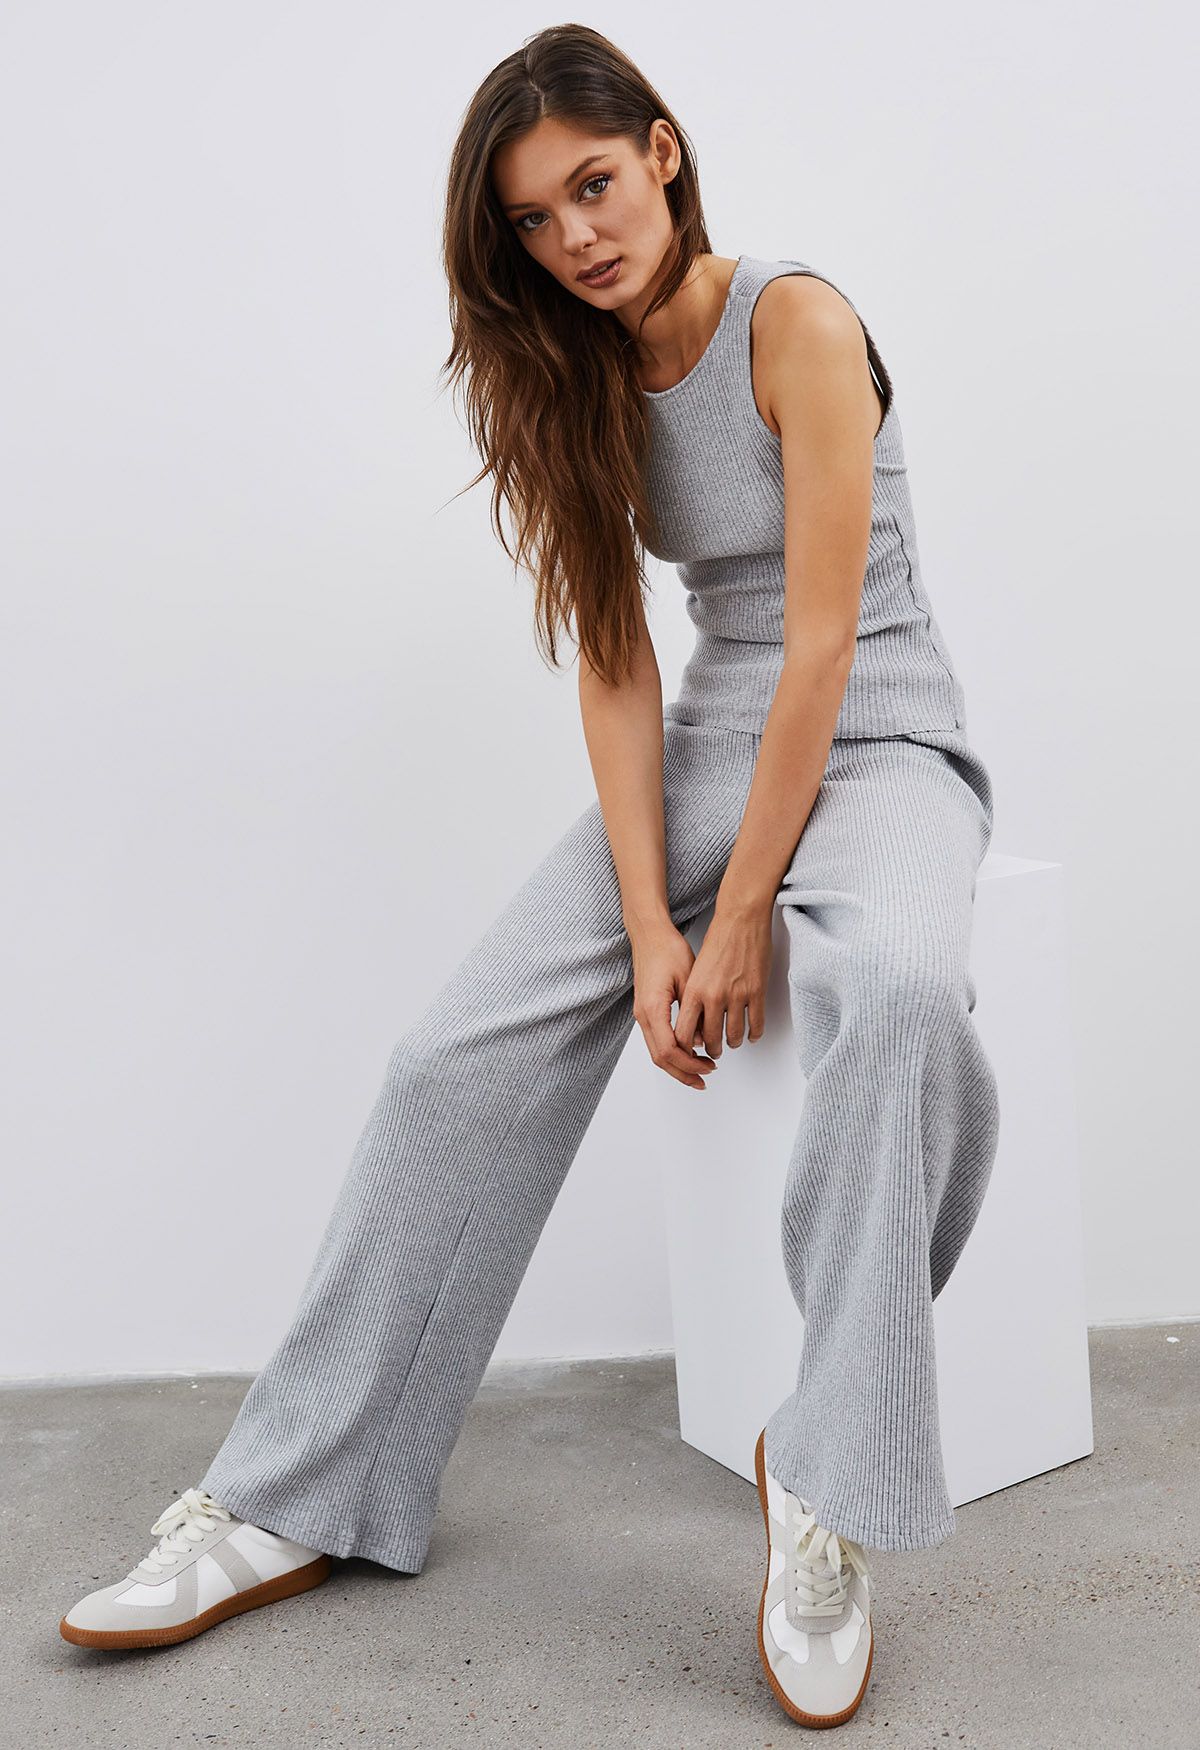 Trendy Soft Crop Top and Flare Pants Set in Grey